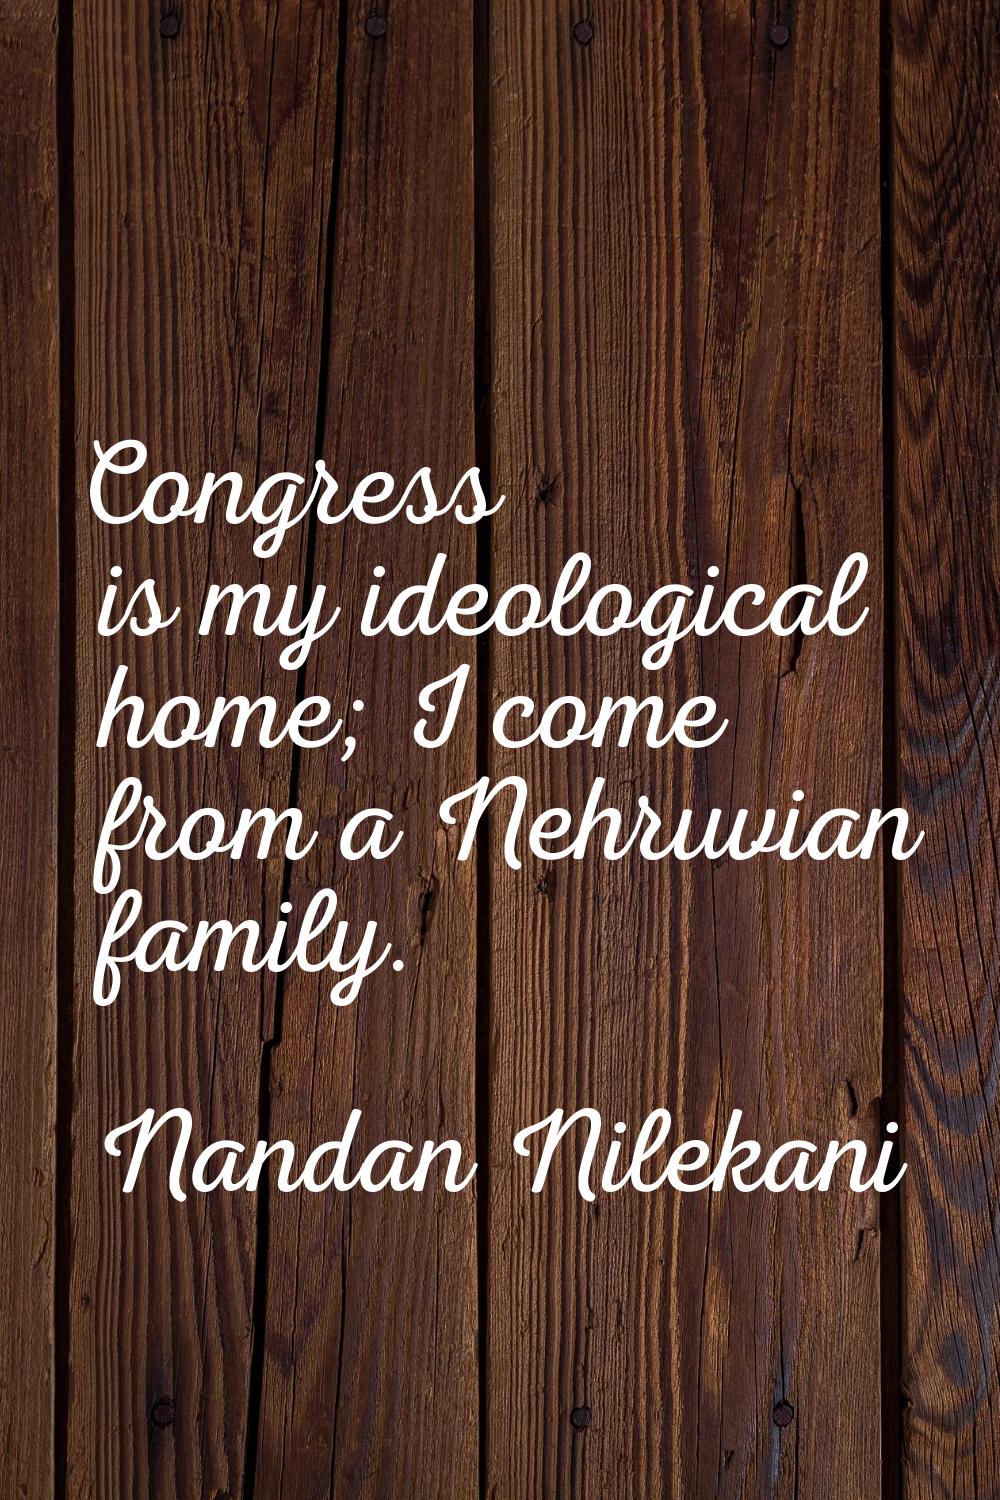 Congress is my ideological home; I come from a Nehruvian family.